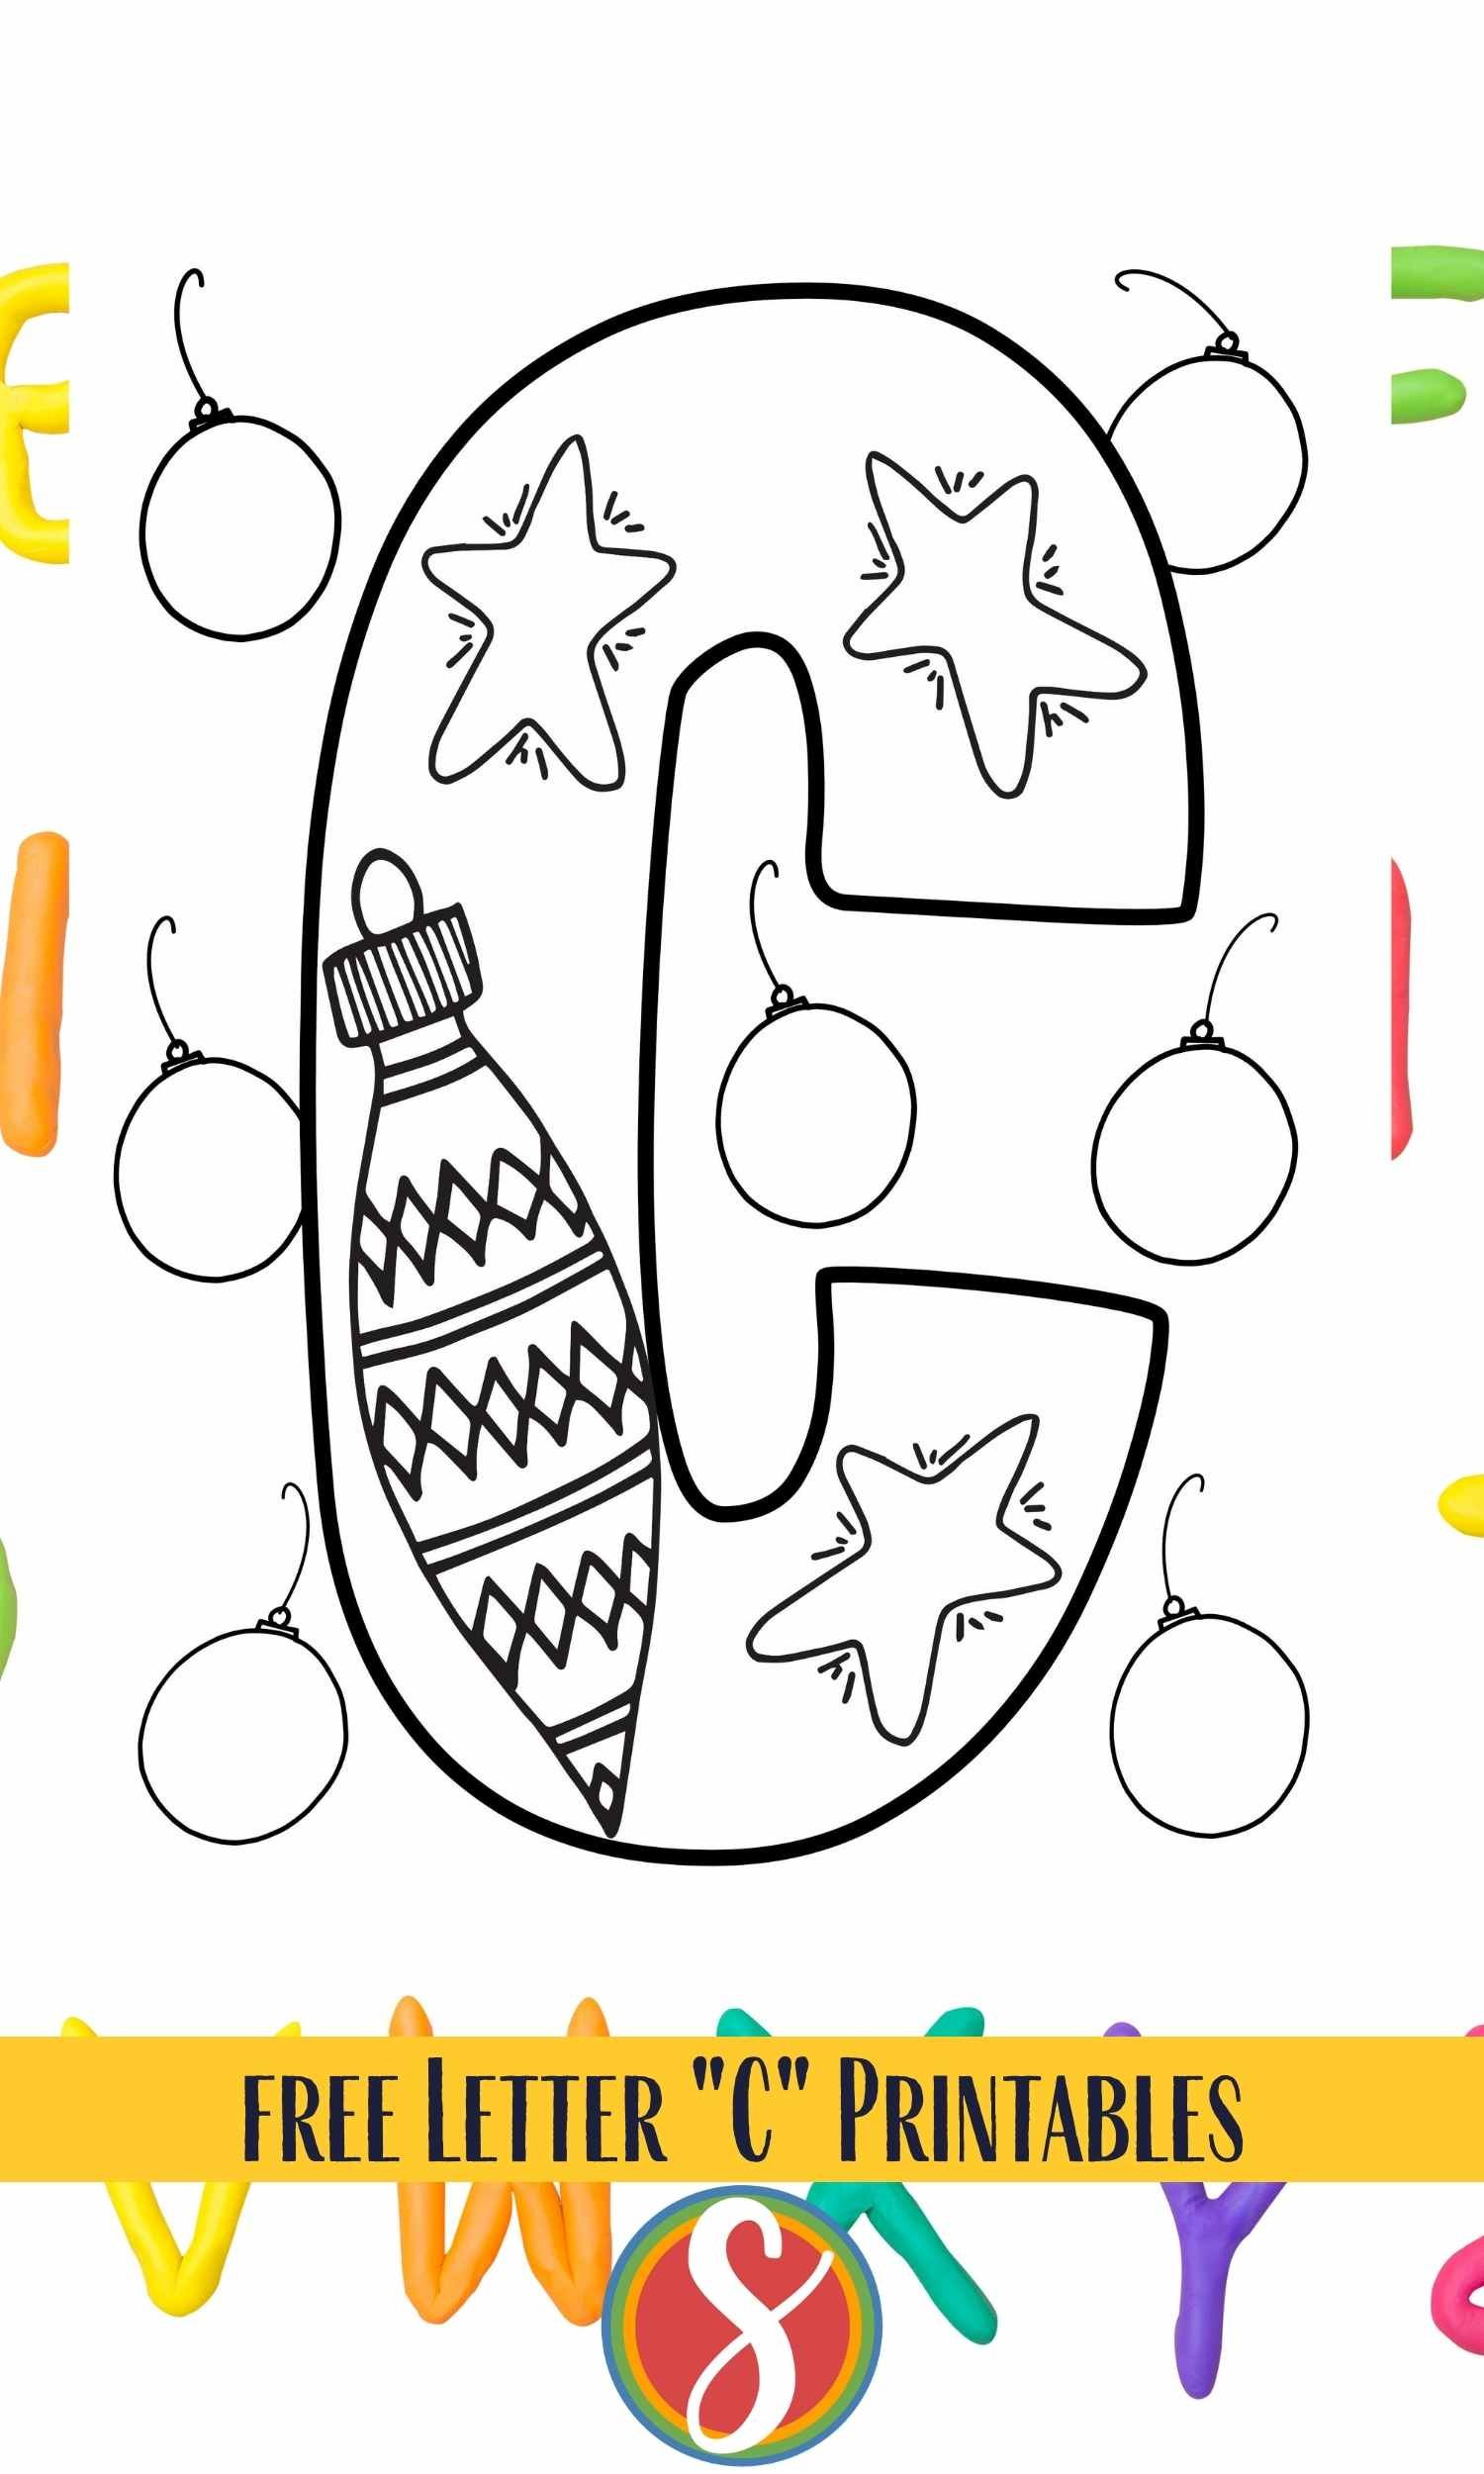 bib bubble letter C with stars and one large ornament inside, C is surrounded by ball ornaments